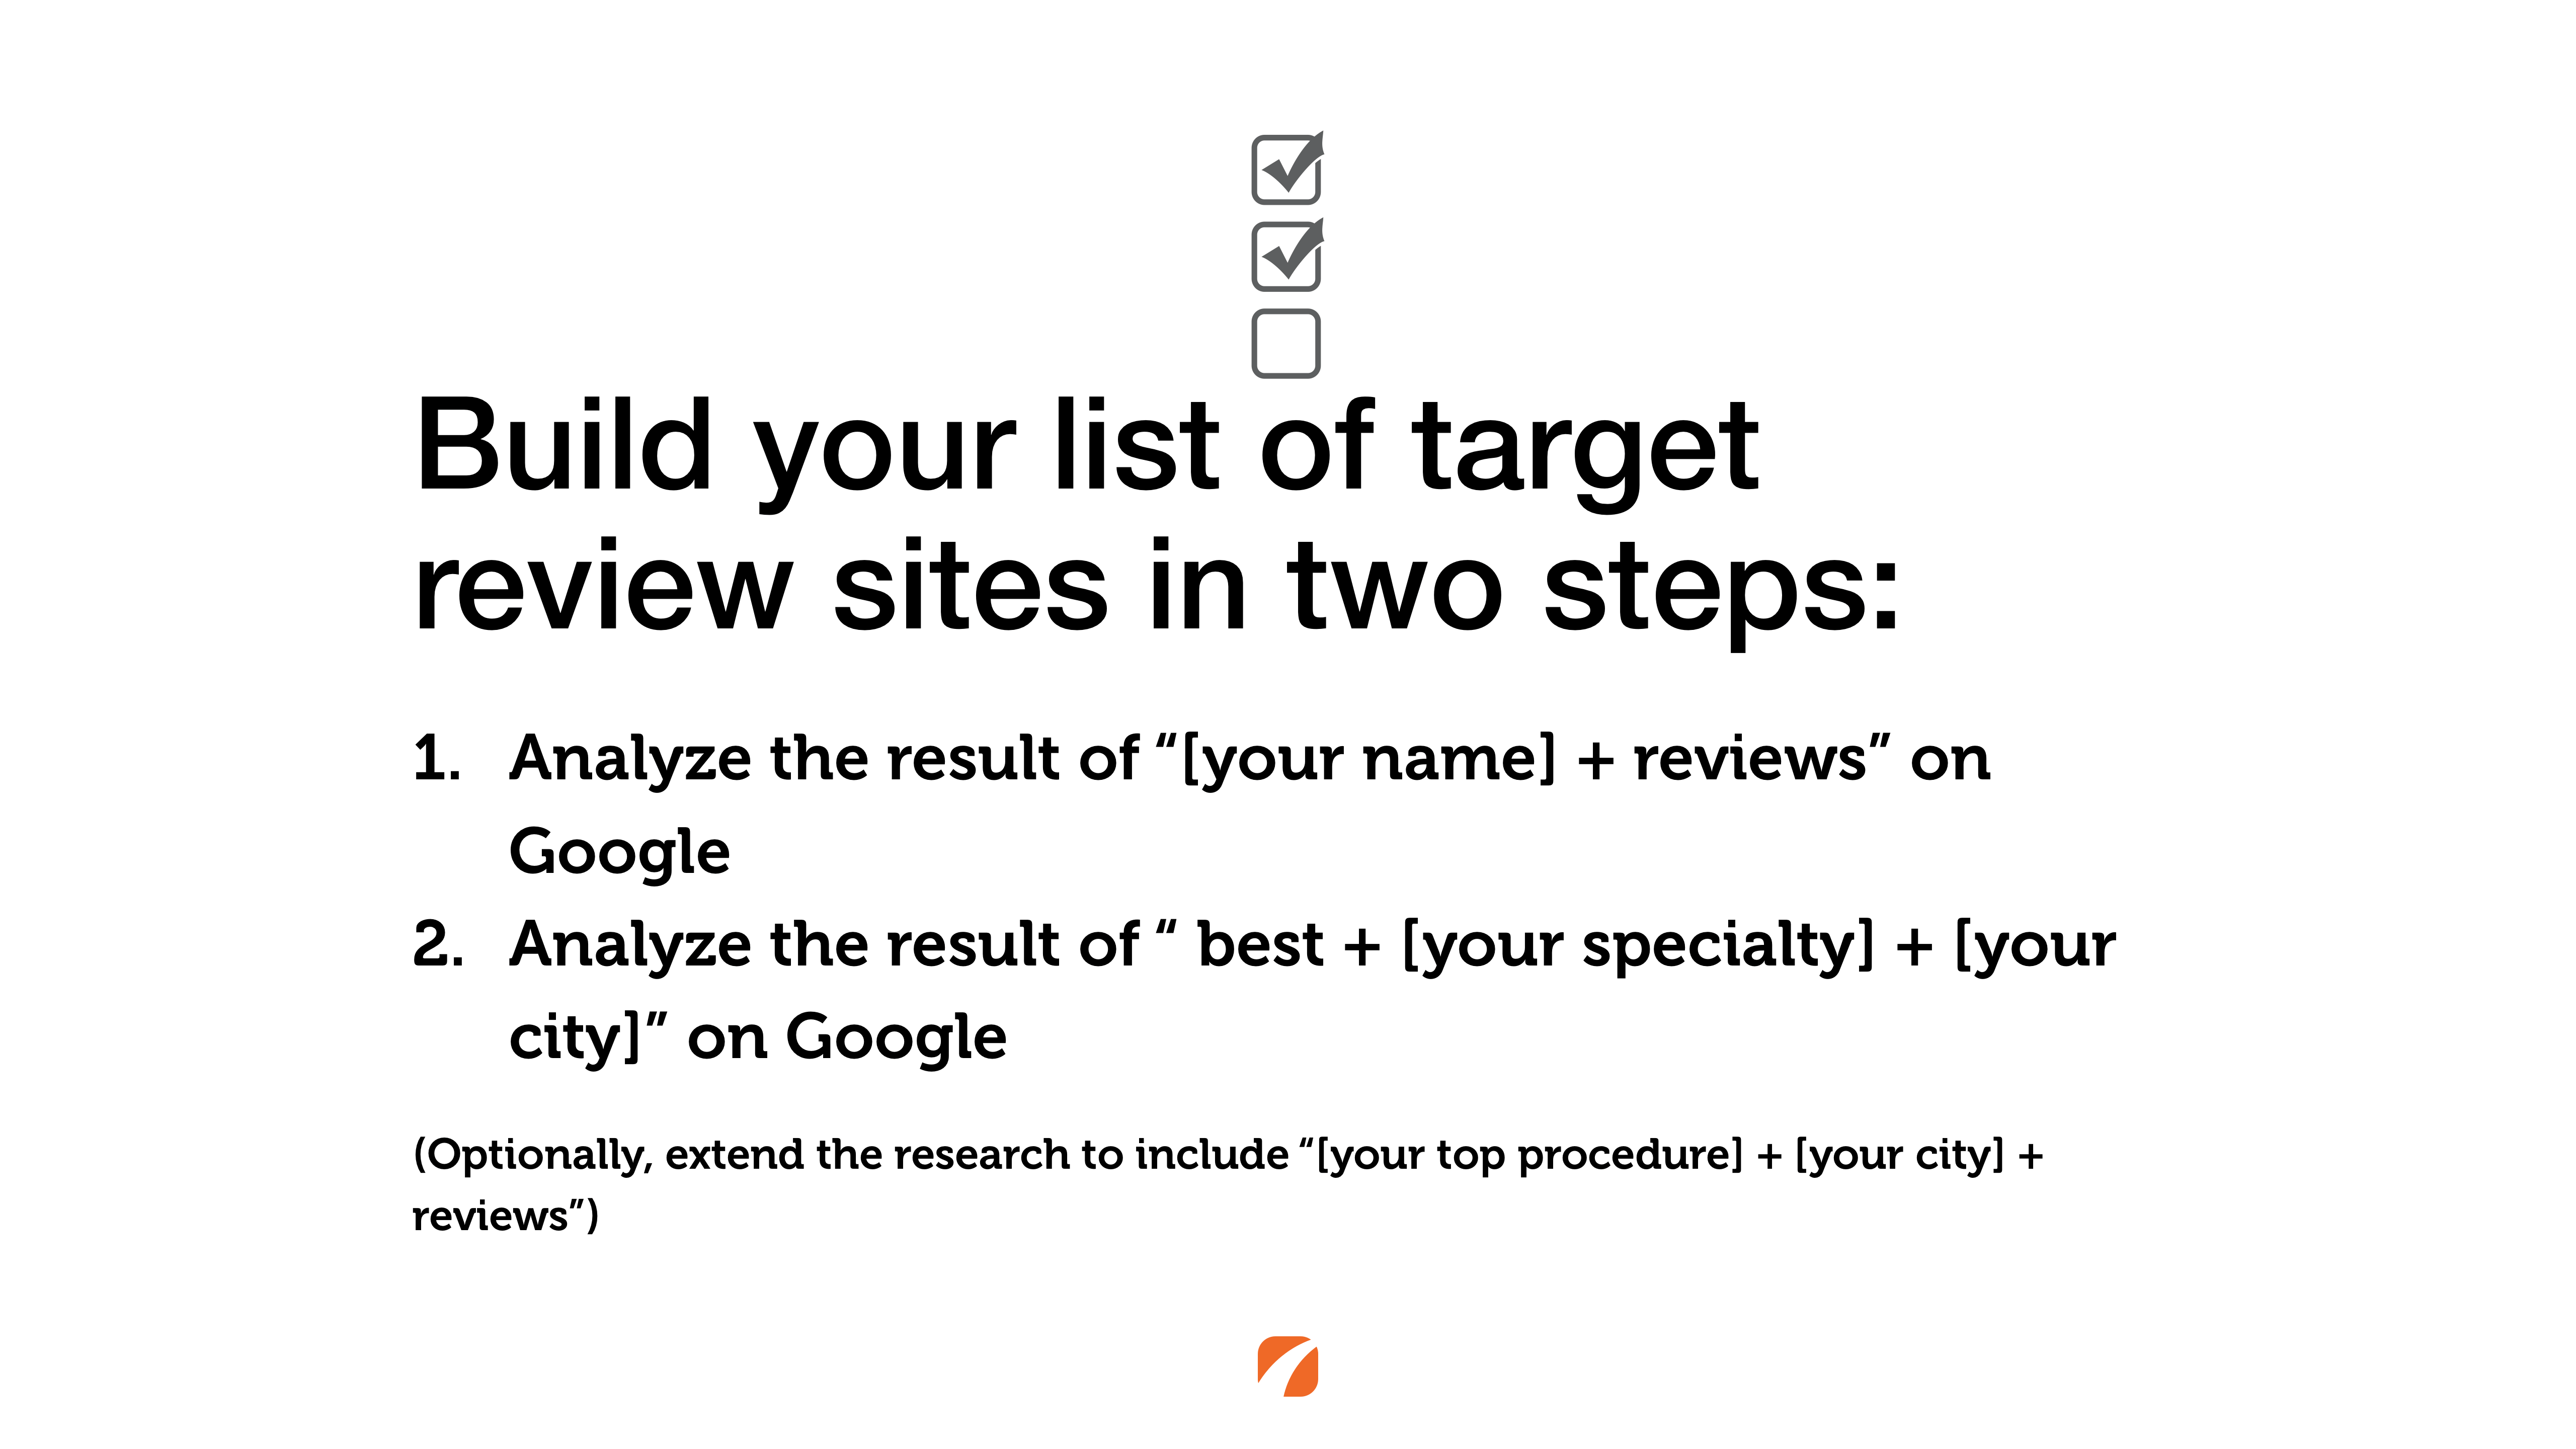 Two steps to build your list of target review sites. 